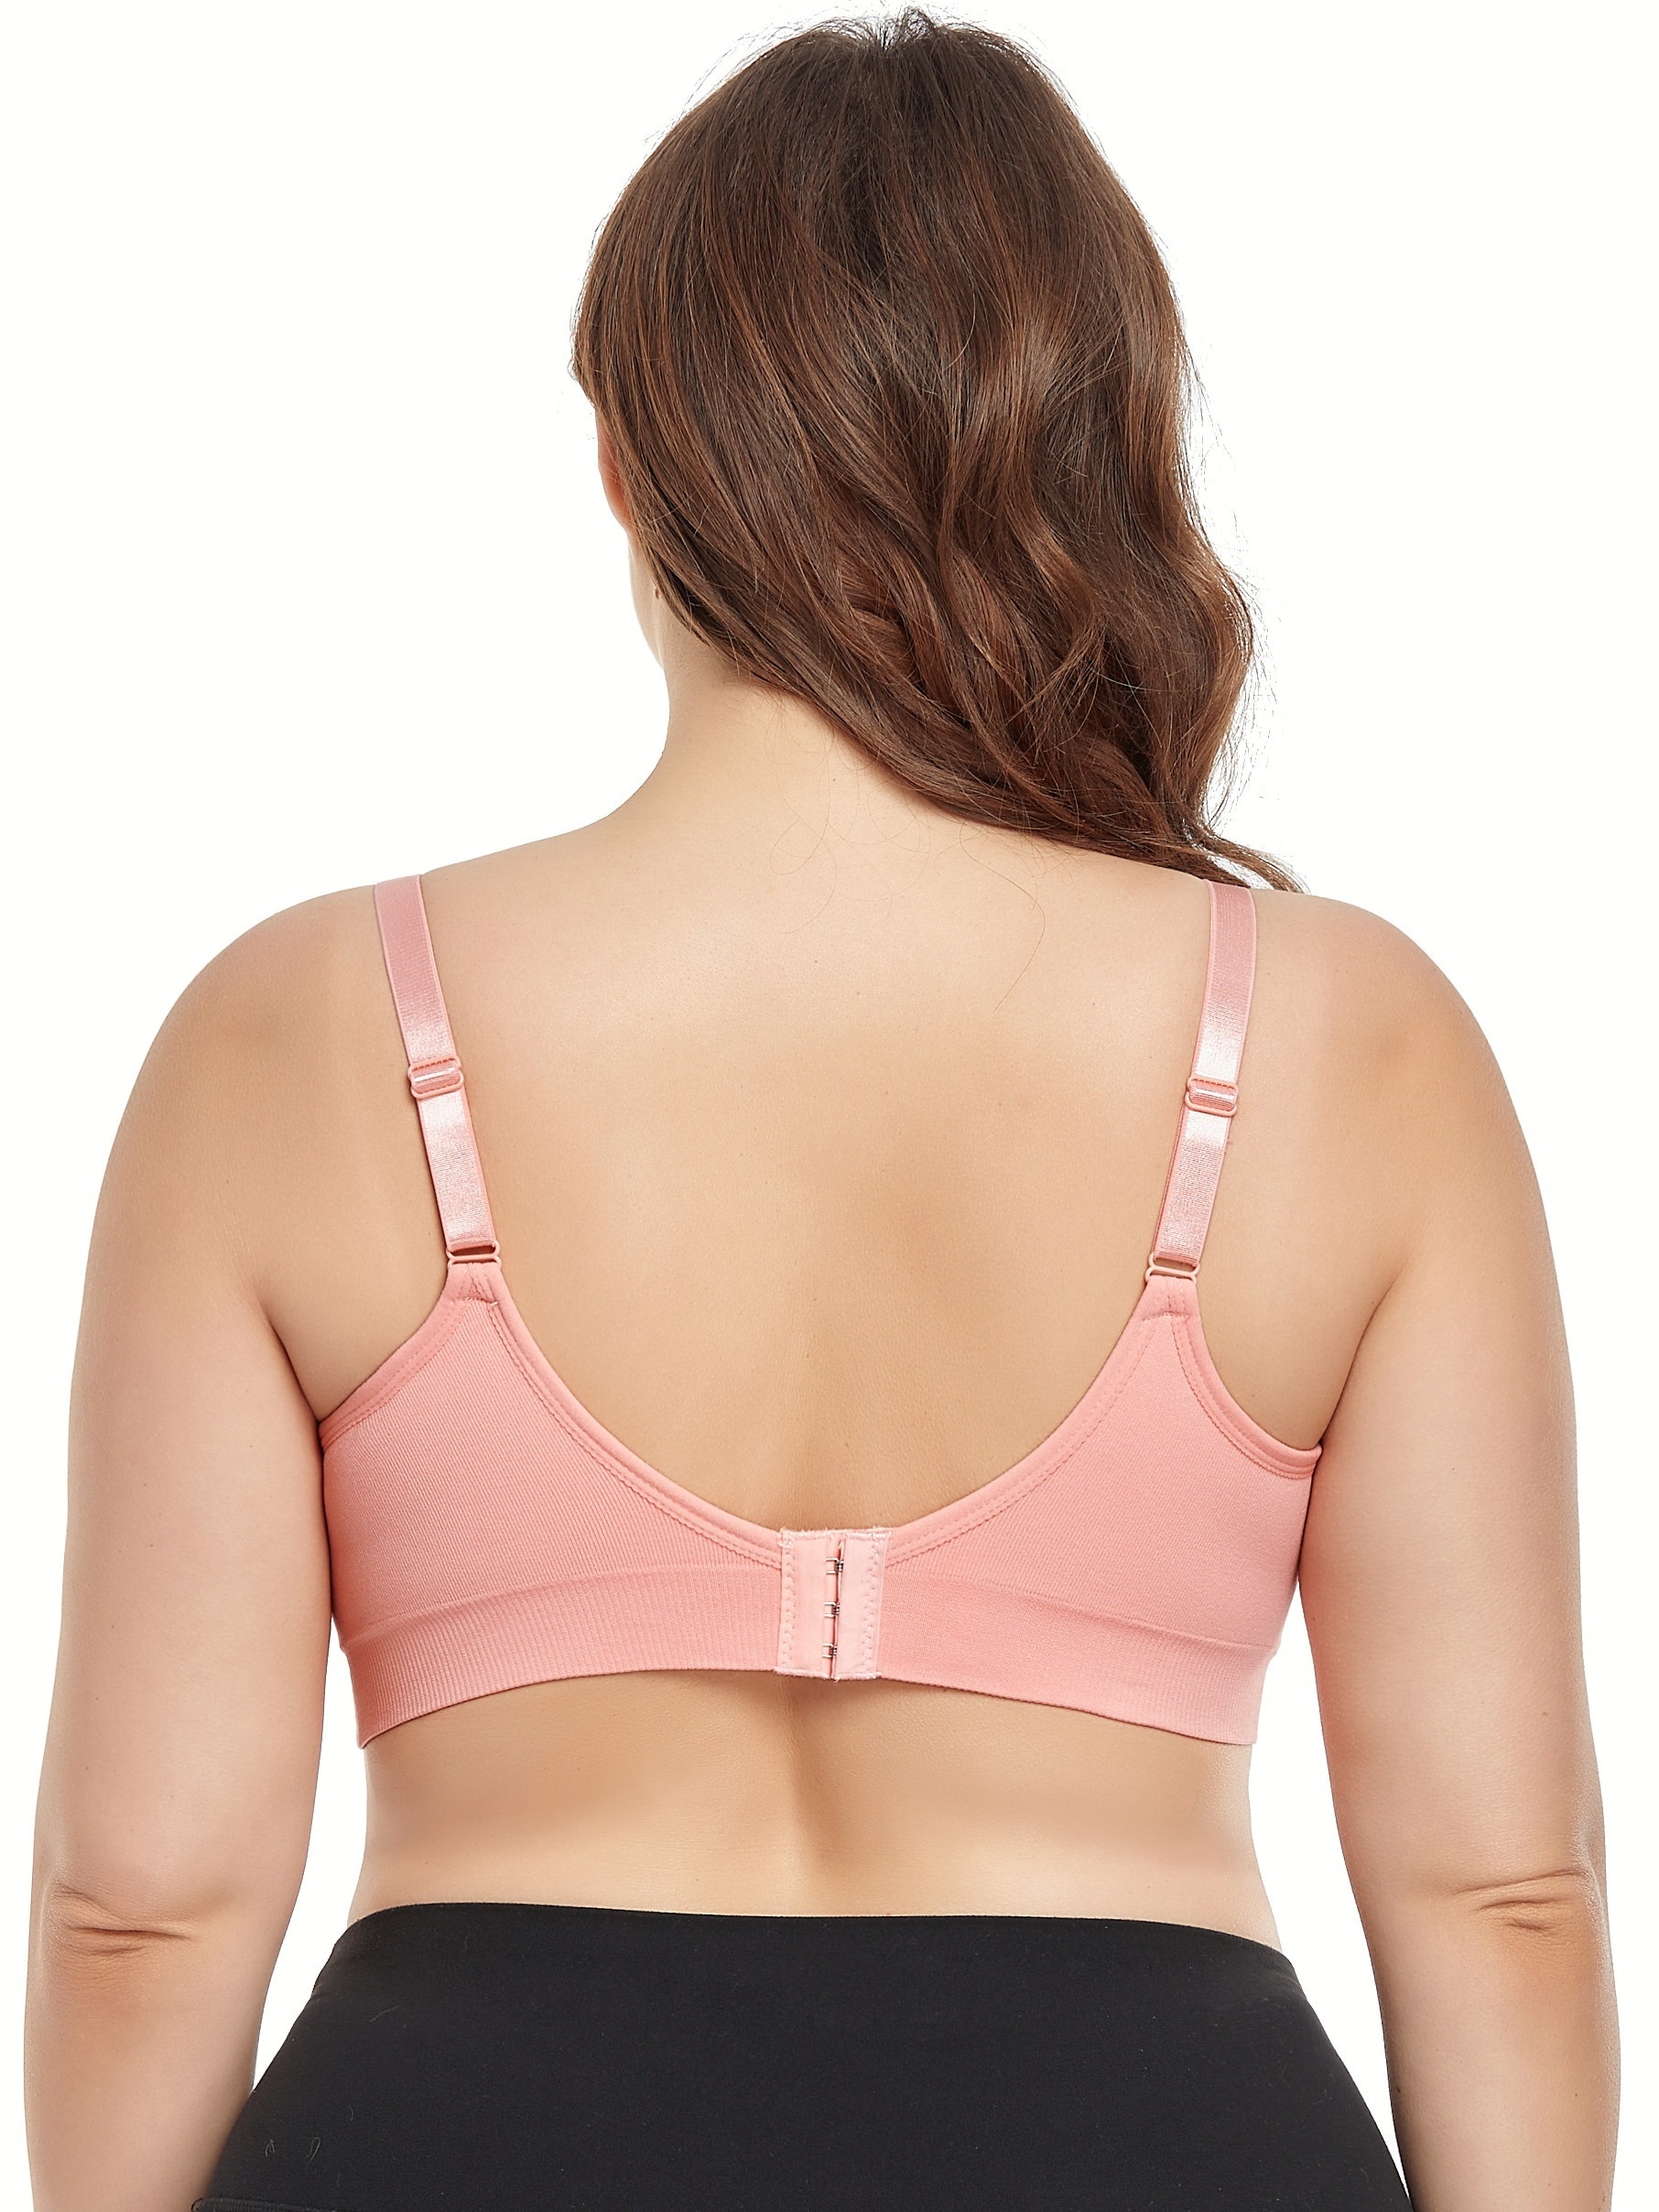 Maternity Nursing Bra For Breastfeeding And Pregnancy Plus Size Bra And  Underwear For Women From Maoxuewang, $16.72